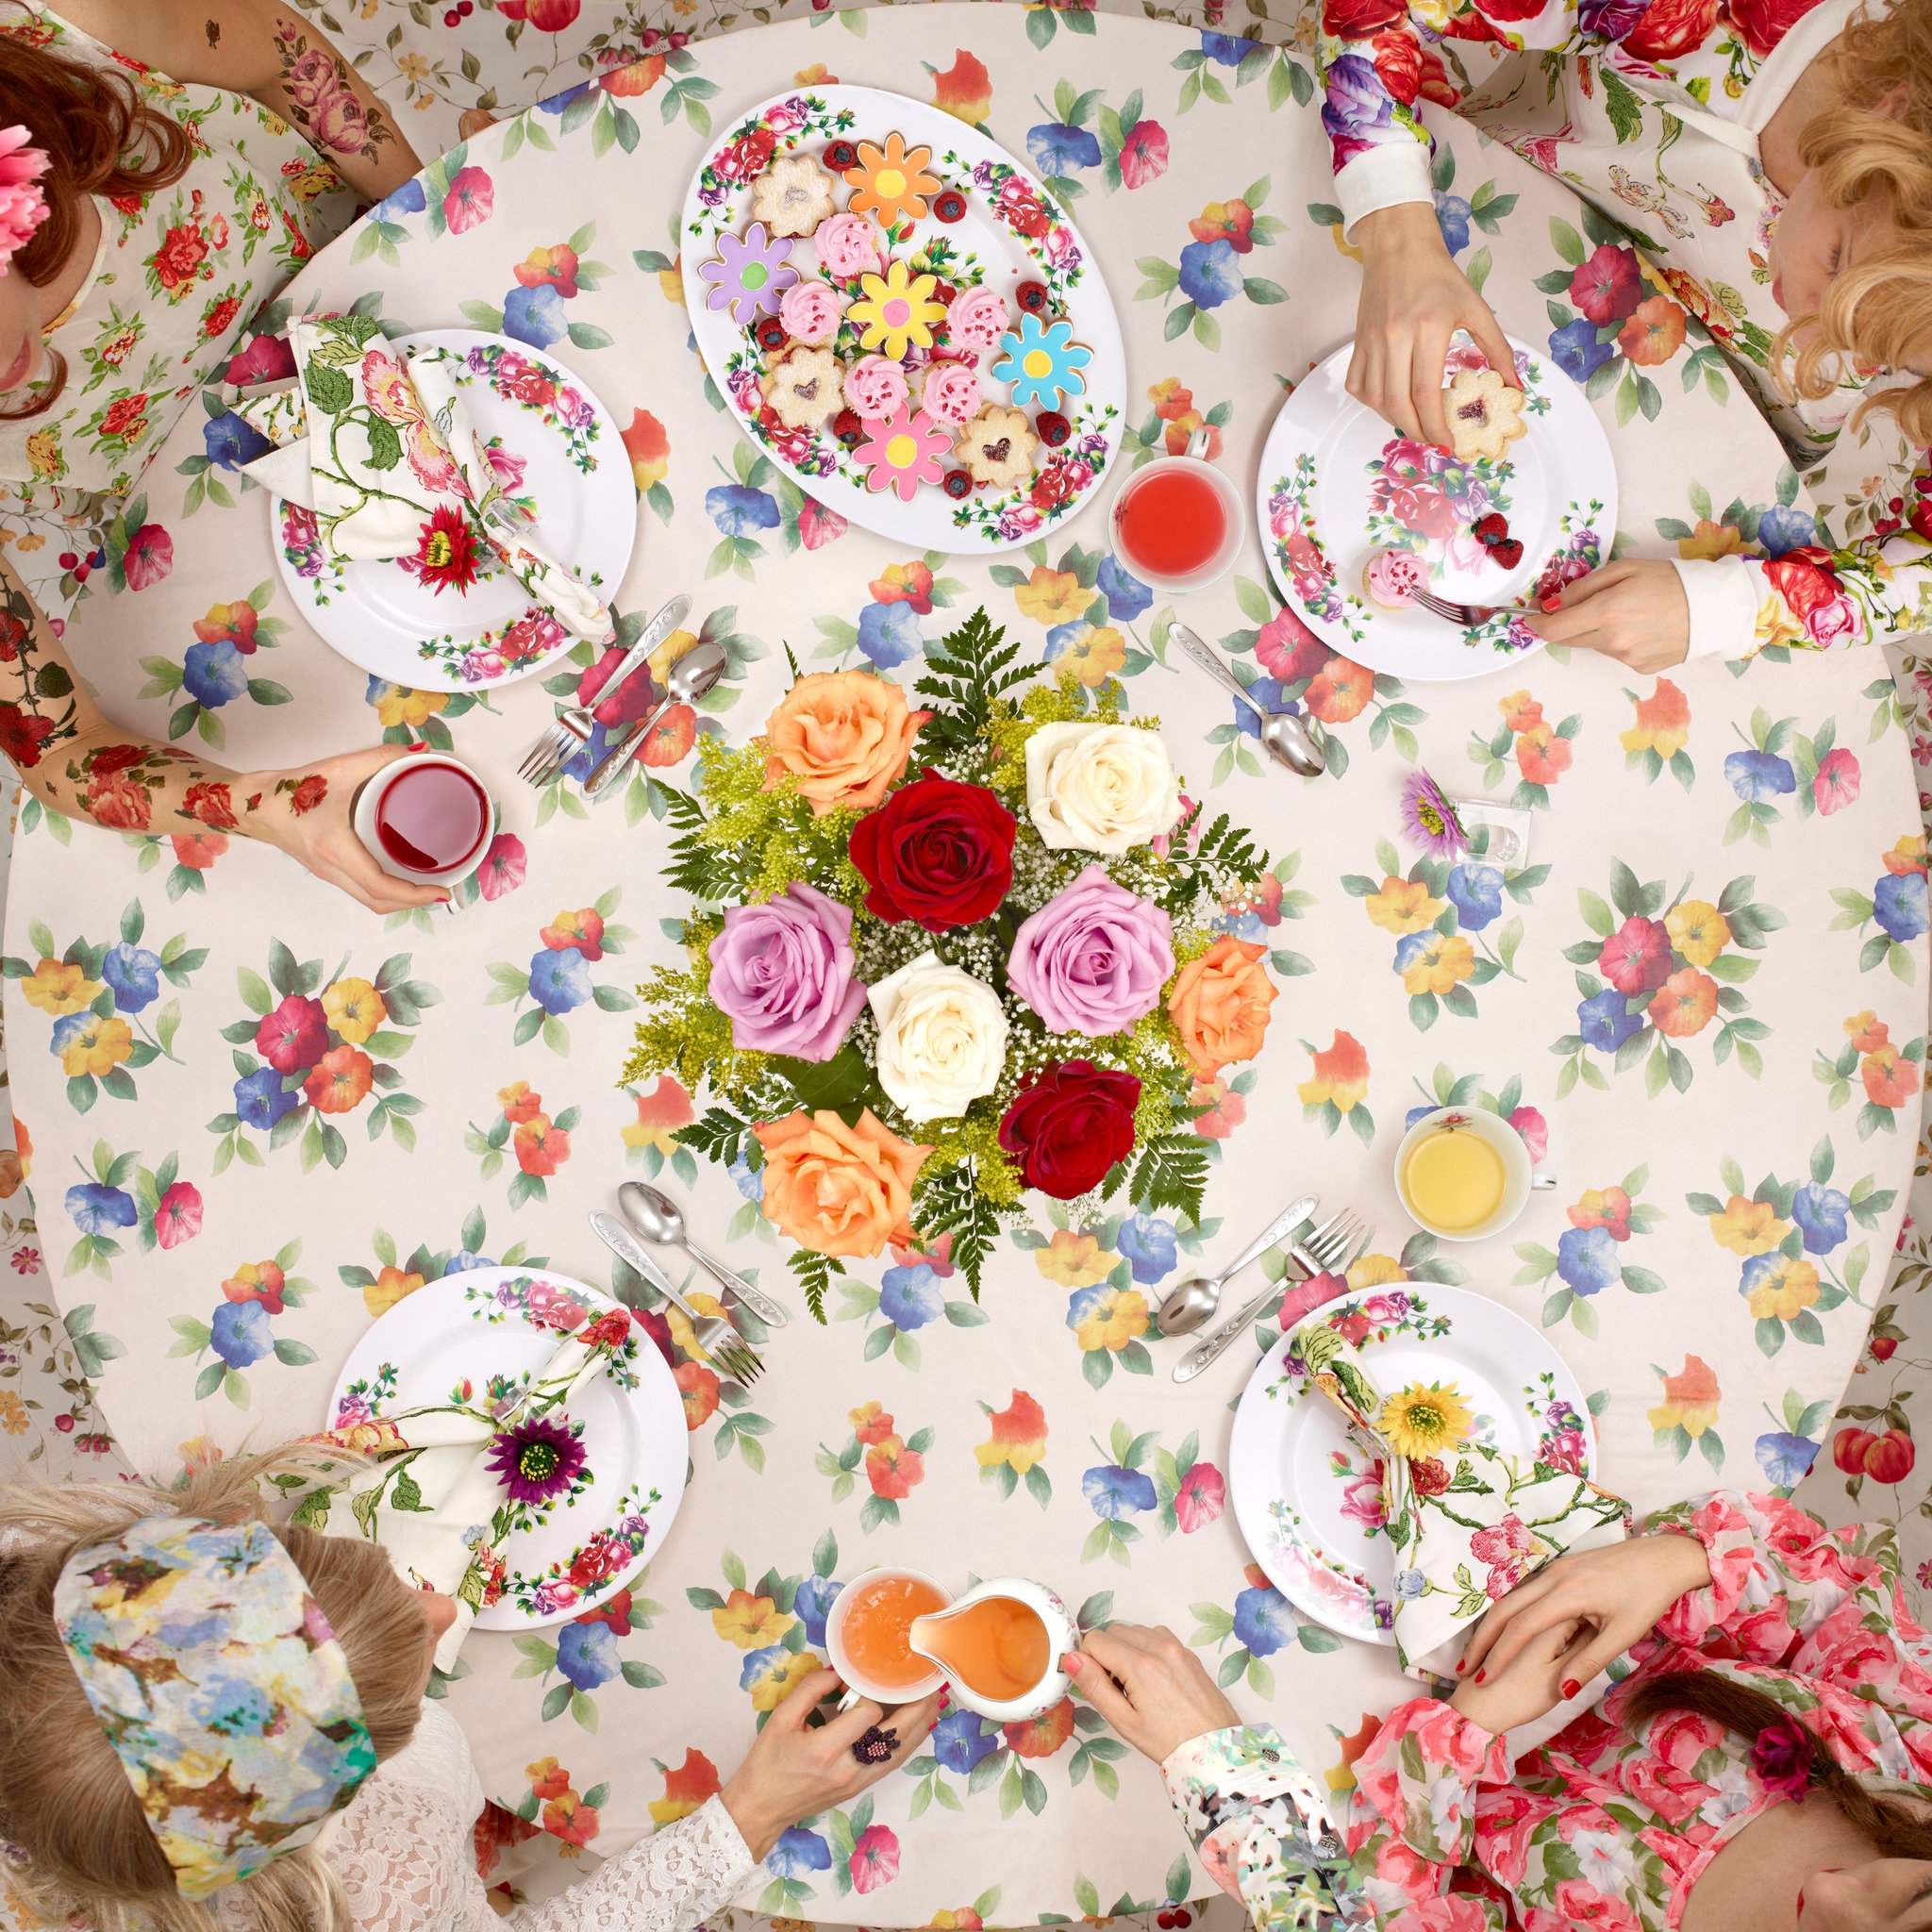 a group of young girls host tea time around a floral tablecloth